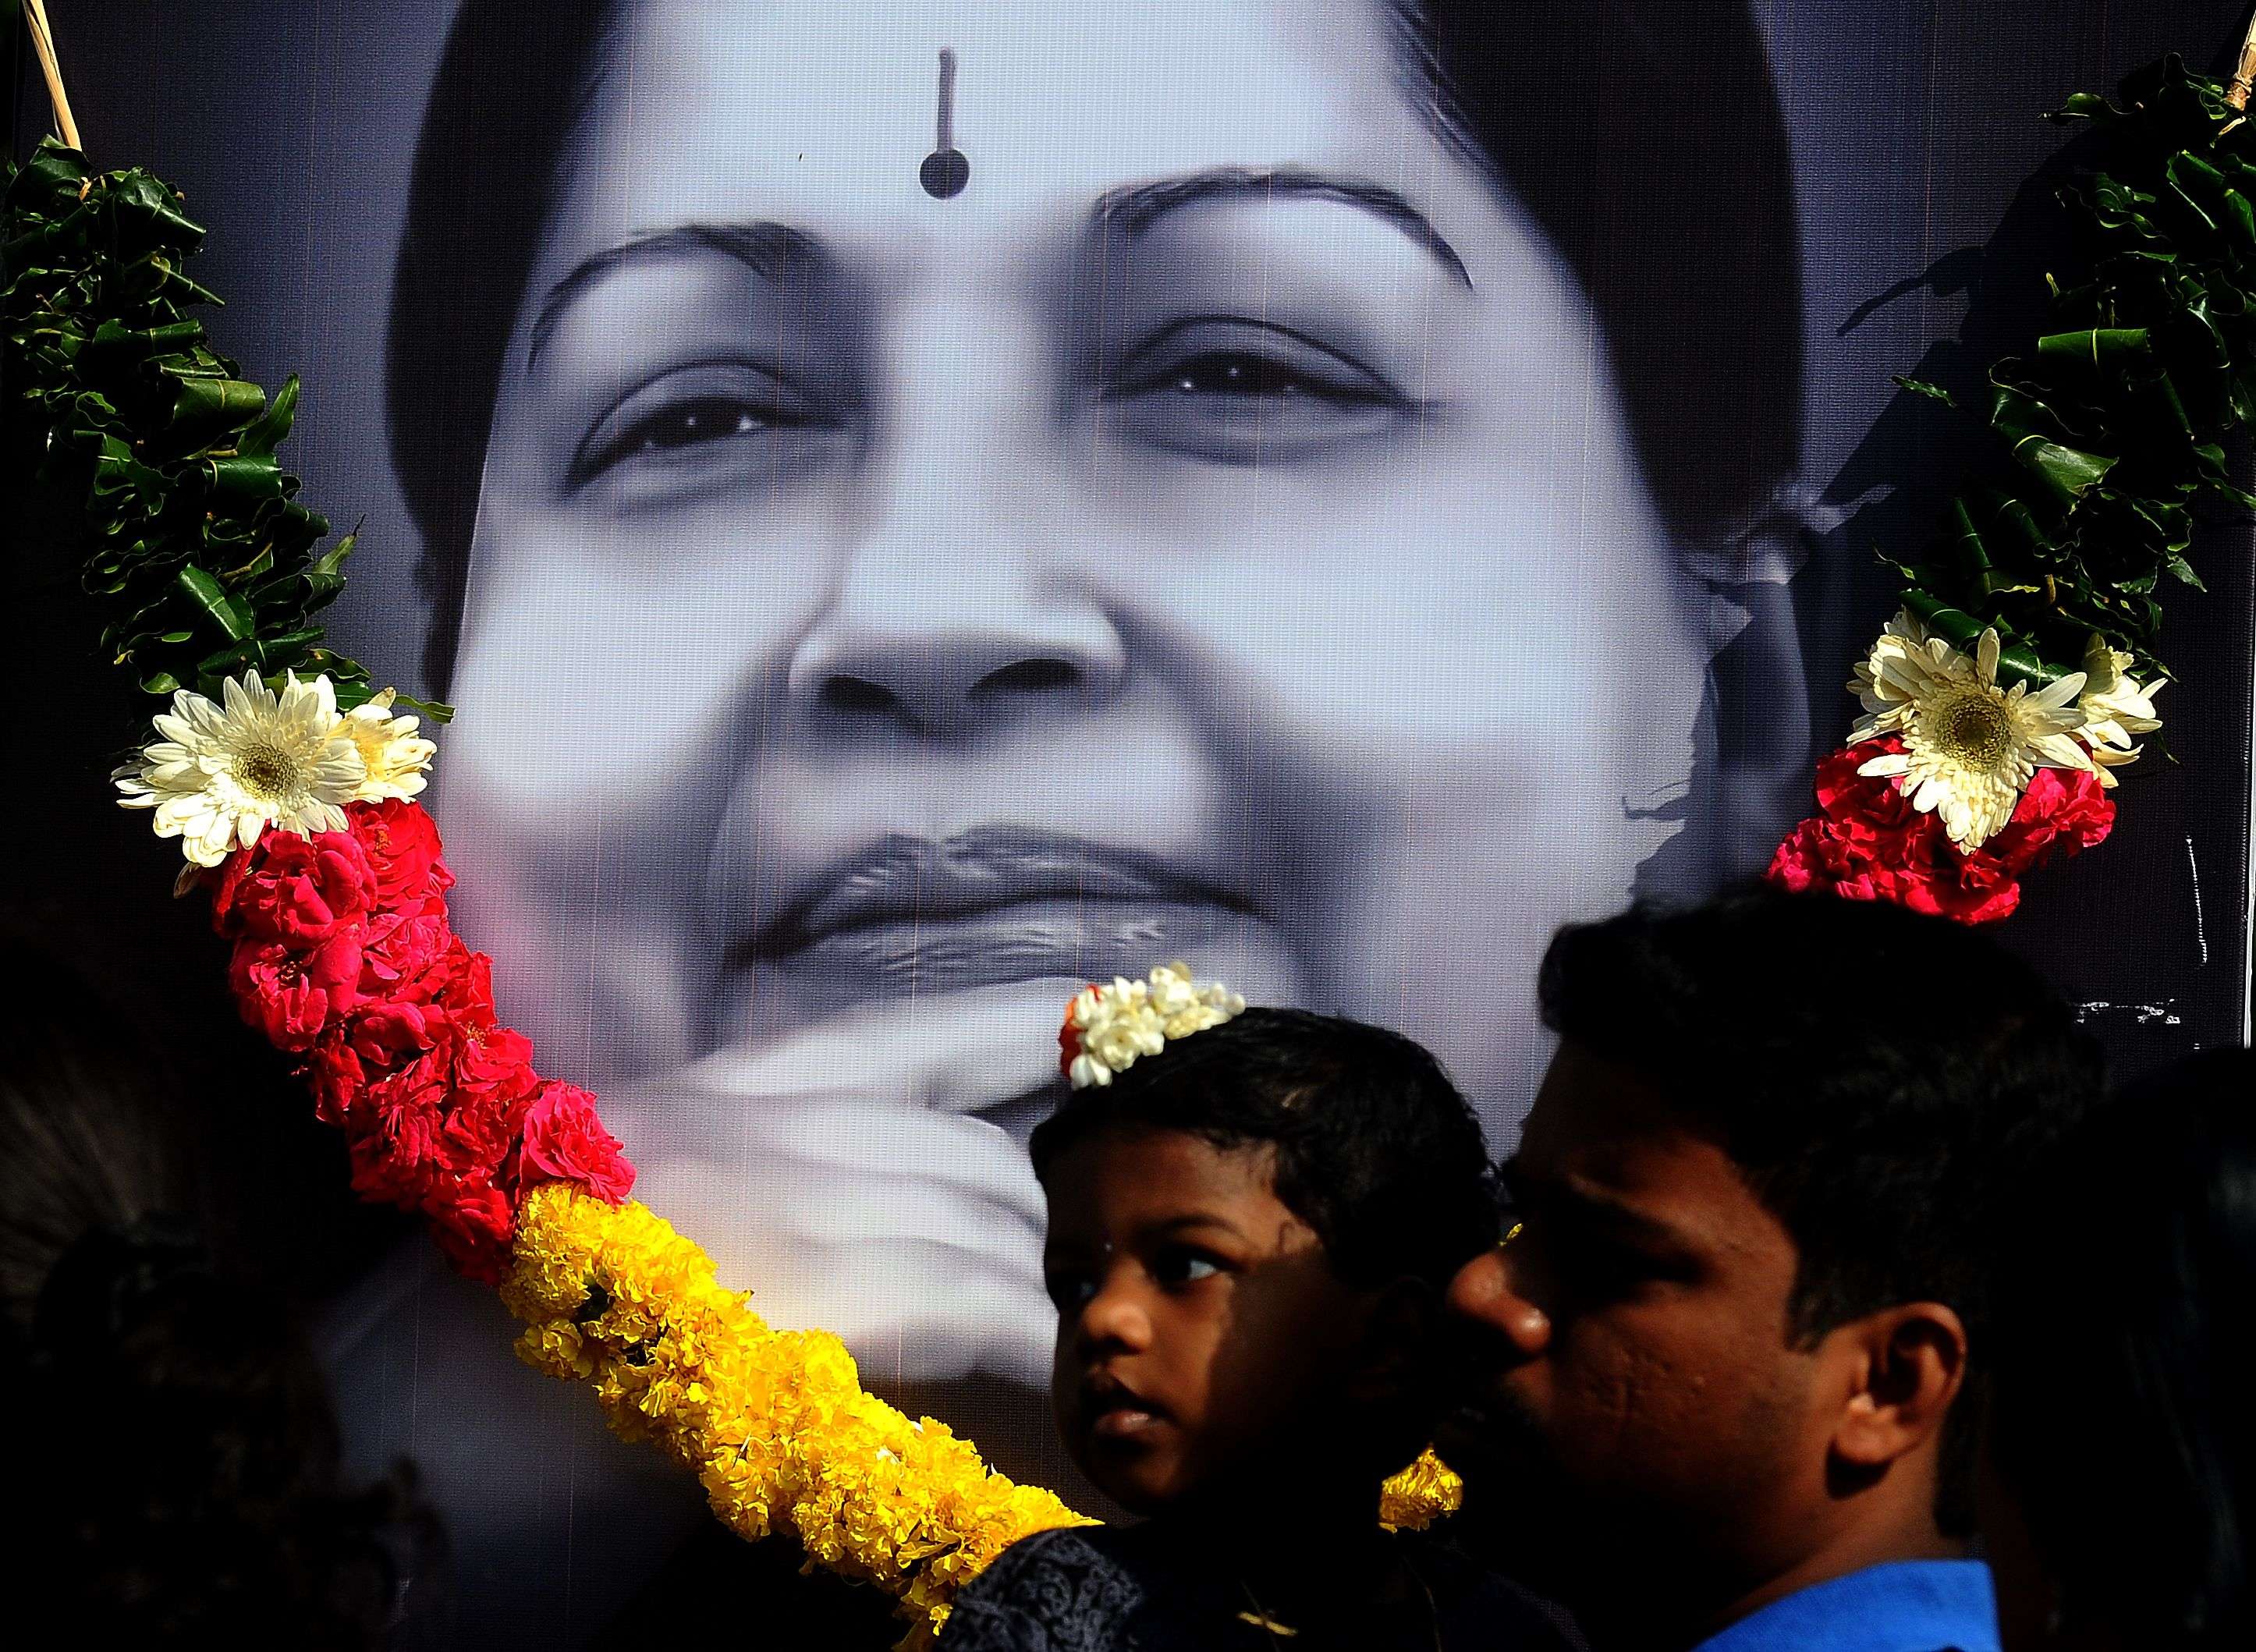 Supporters of AIADMK pay homage to Former Chief Minister J Jayalalithaa in front of her picture outside MGR memorial on Kamarajar salai in Chennai on Wednesday 07-12-0216 Photo B A Raju